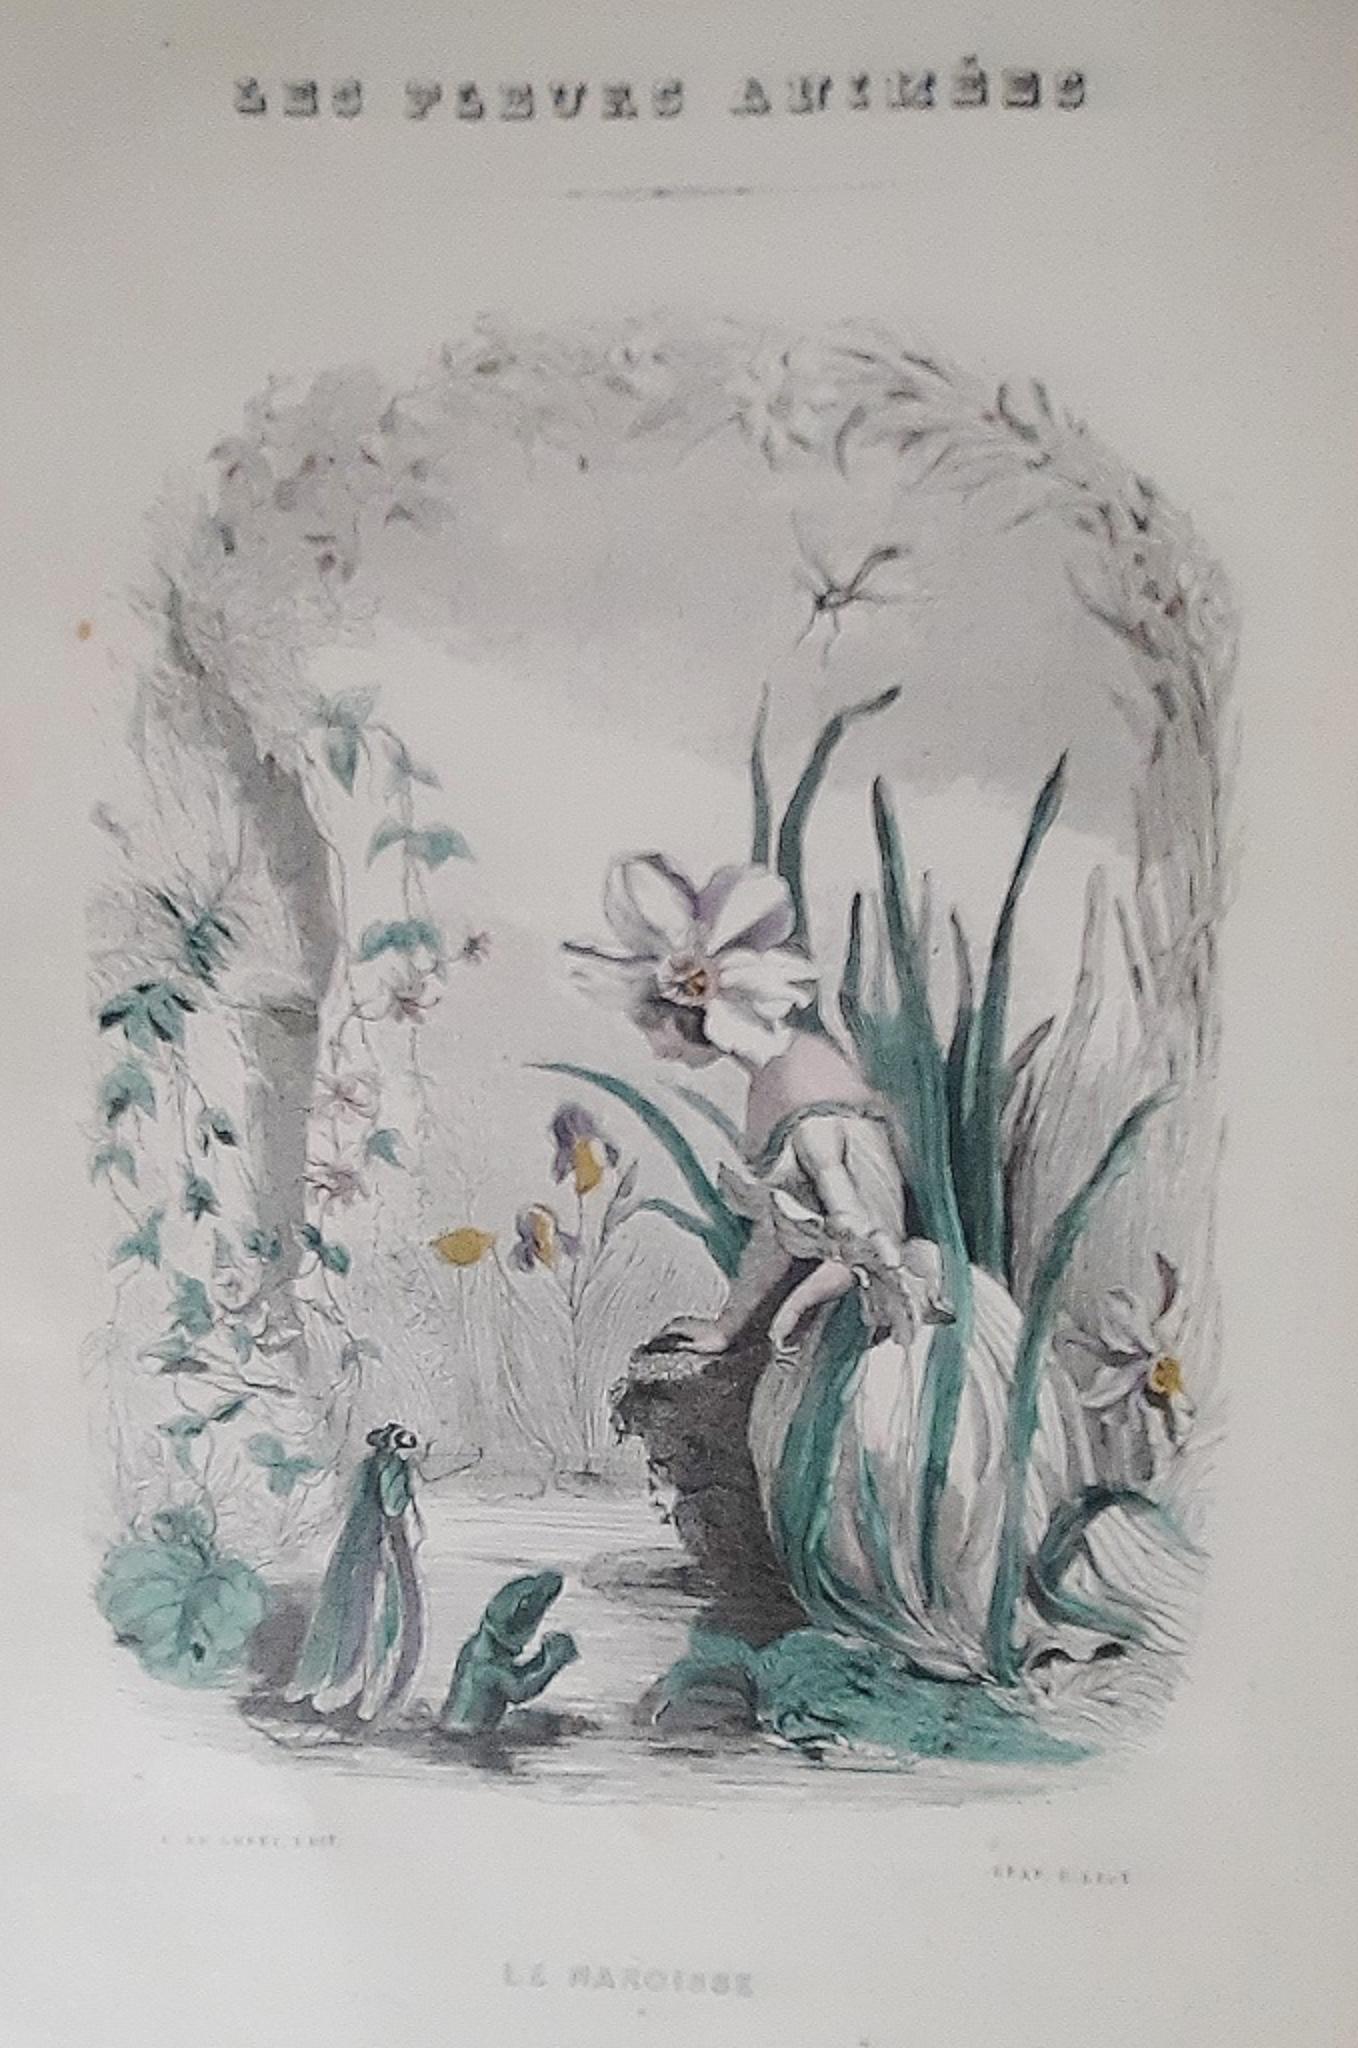 Les Fleurs Animées is an original modern rare book engraved by Jean Jeacques Grandville  (Nancy, 1803 – Vanves, 1847) and written by Taxile Delord (Avignon, 1815 - Paris, 1877) in 1847.

Original First Edition.

Published by Gabriel de Gonet,